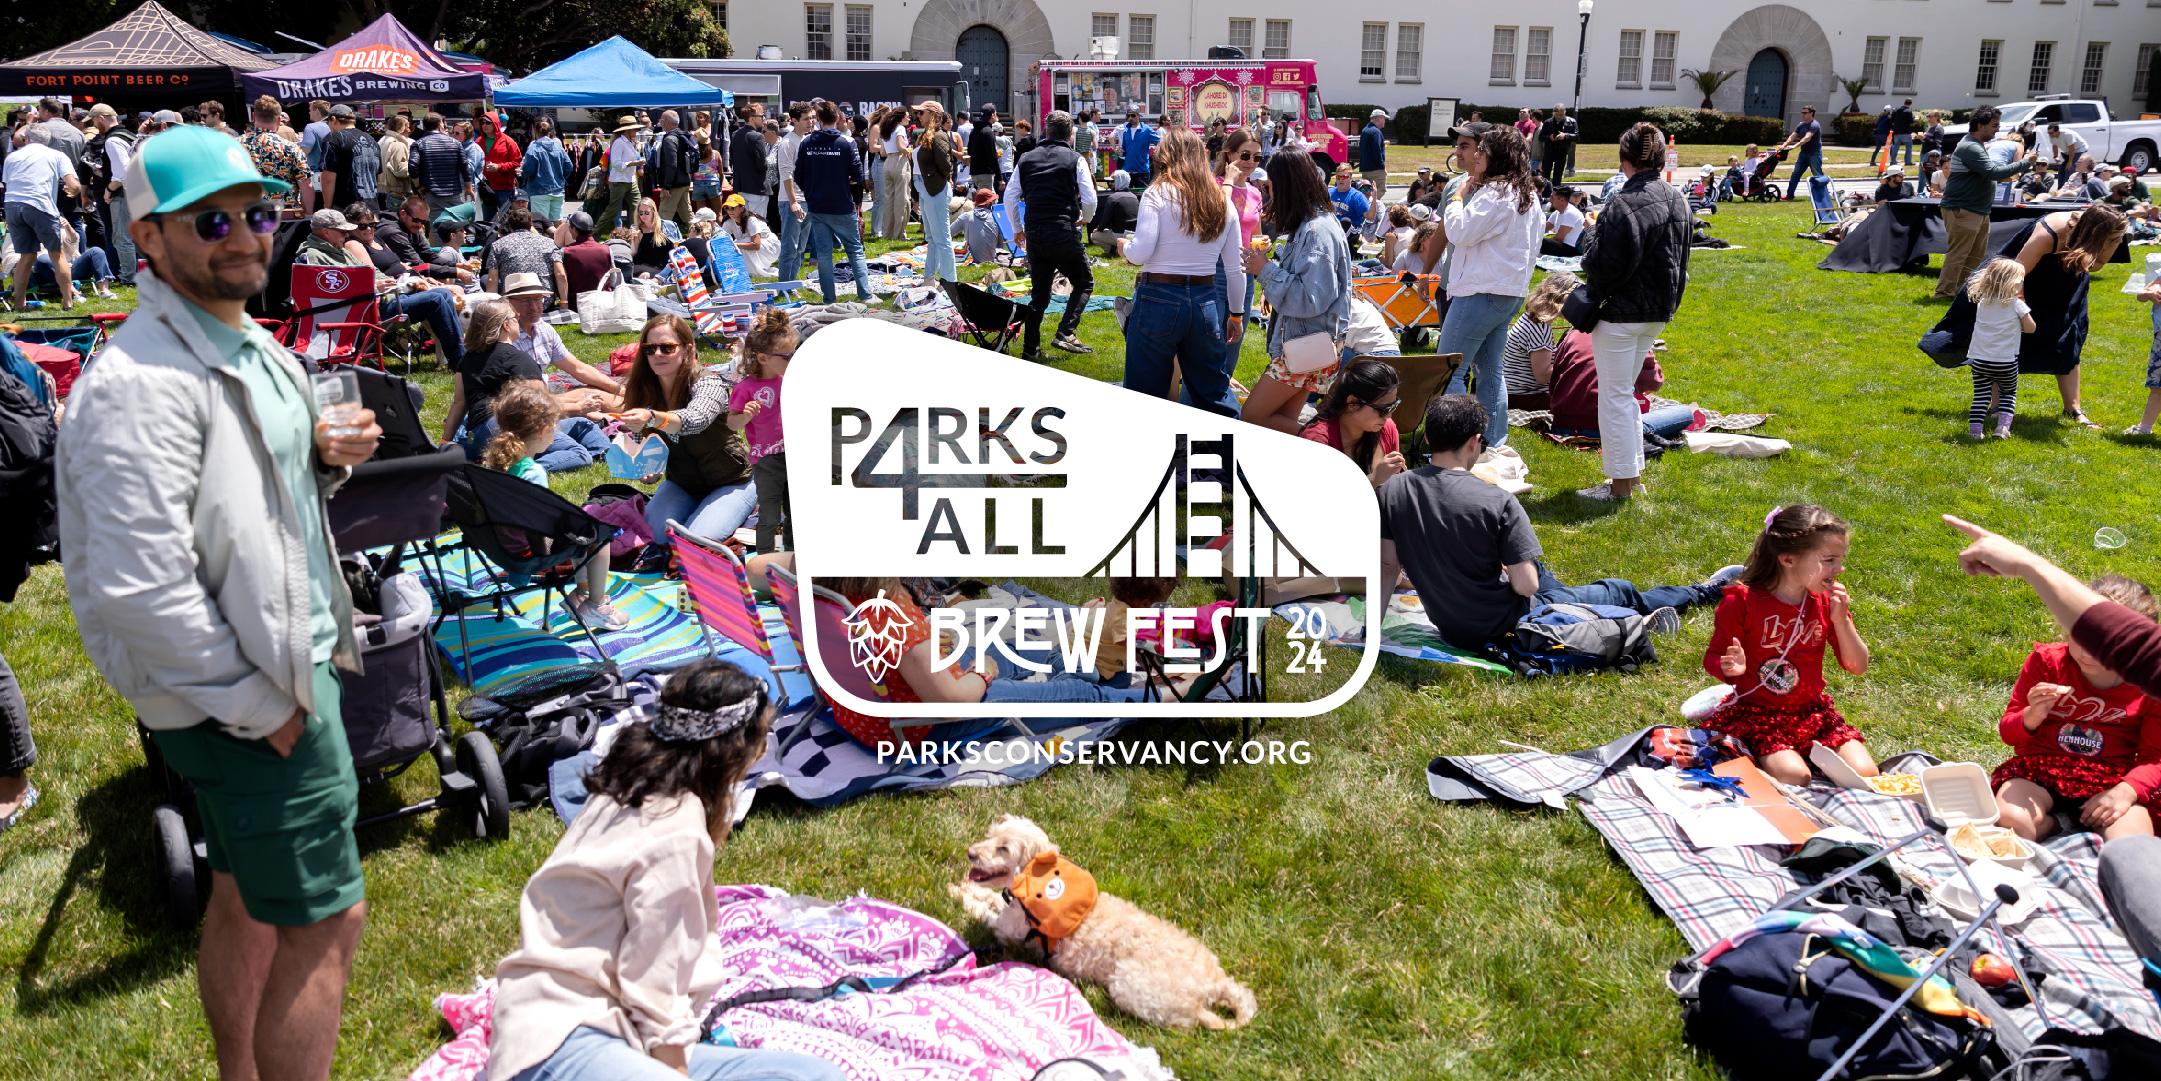 Large group of people having a picnic on the grass with the Parks for all Brewfest logo overlayed on the image